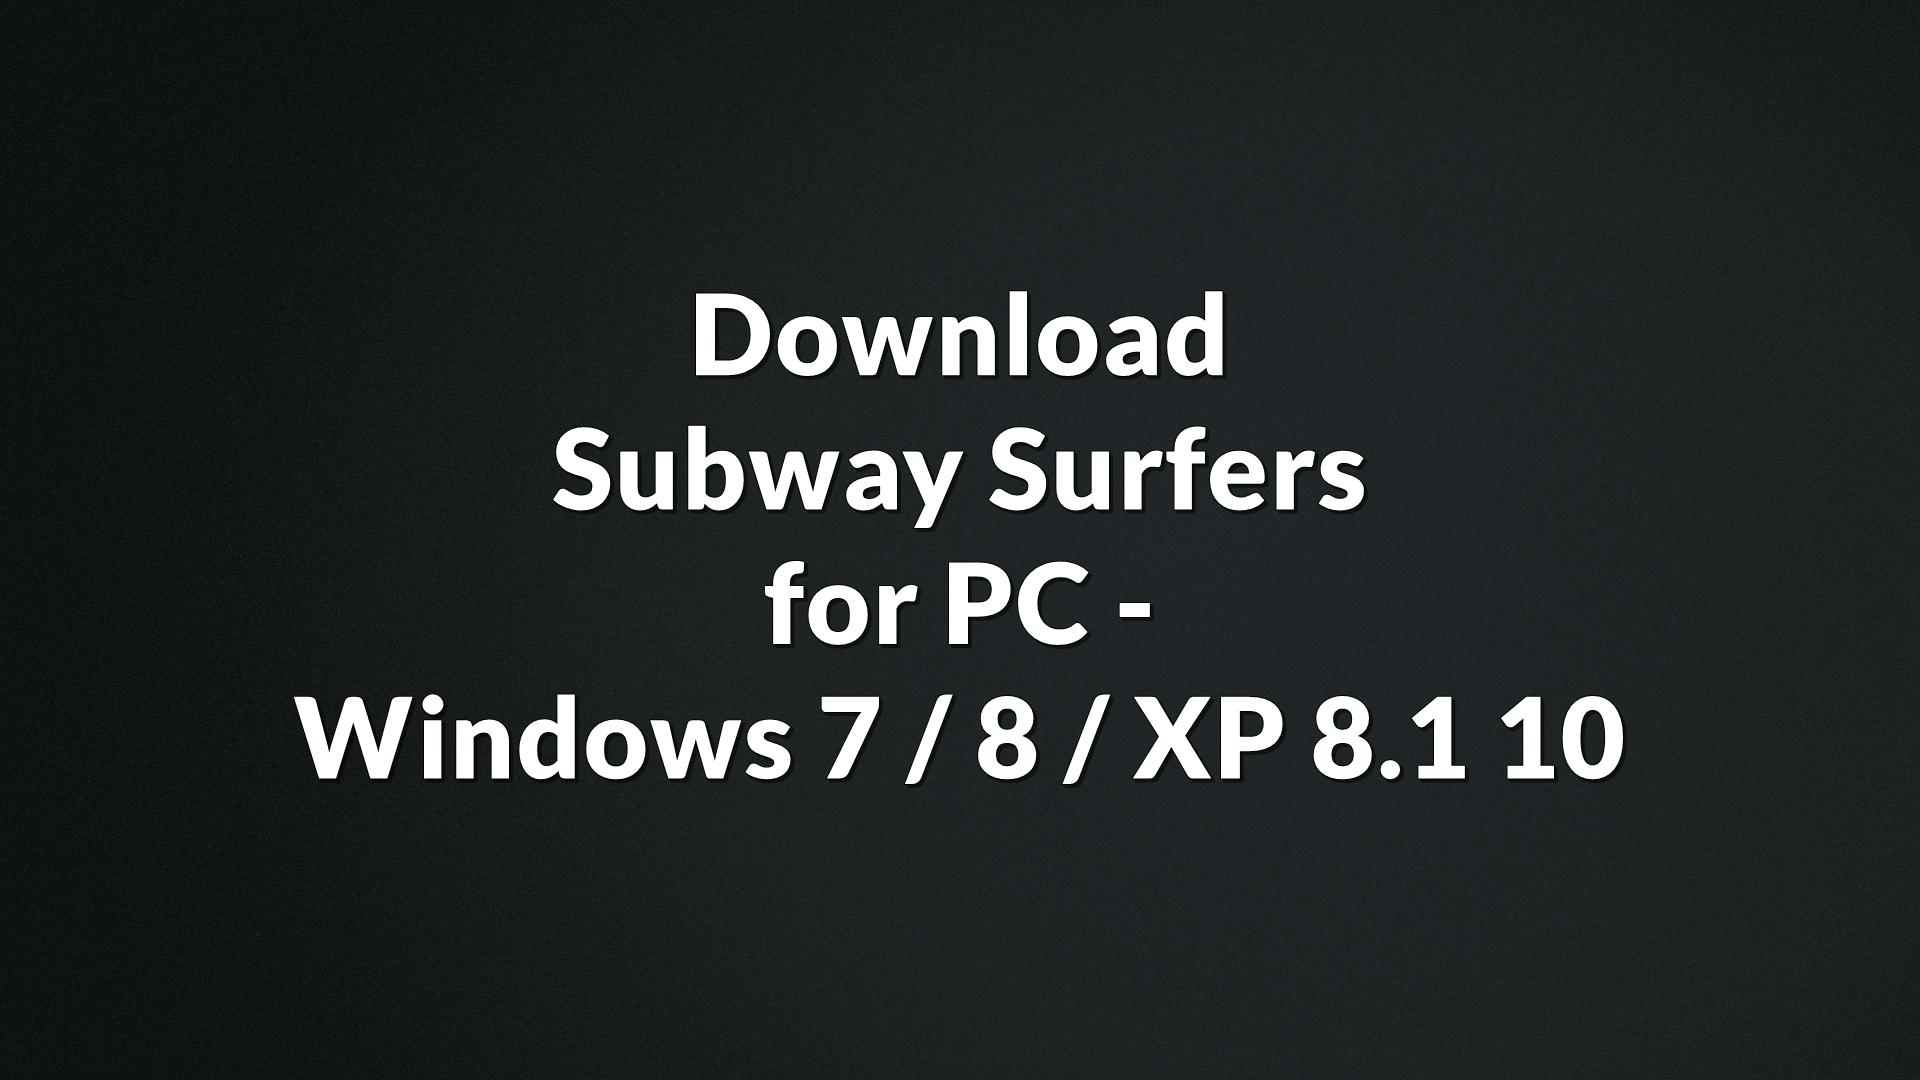 Free Download Subway Surfers For Pc Windows 7 8 Xp 8 1 10